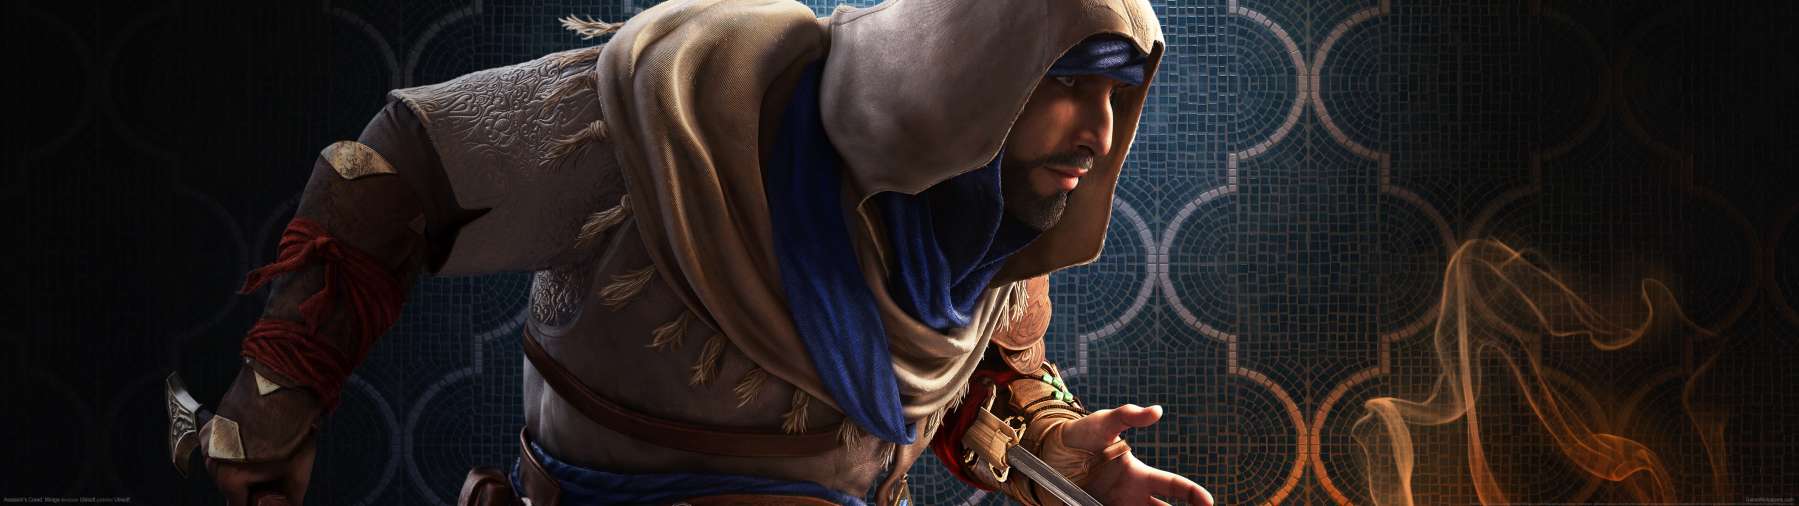 Assassin's Creed: Mirage superwide fond d'cran 02